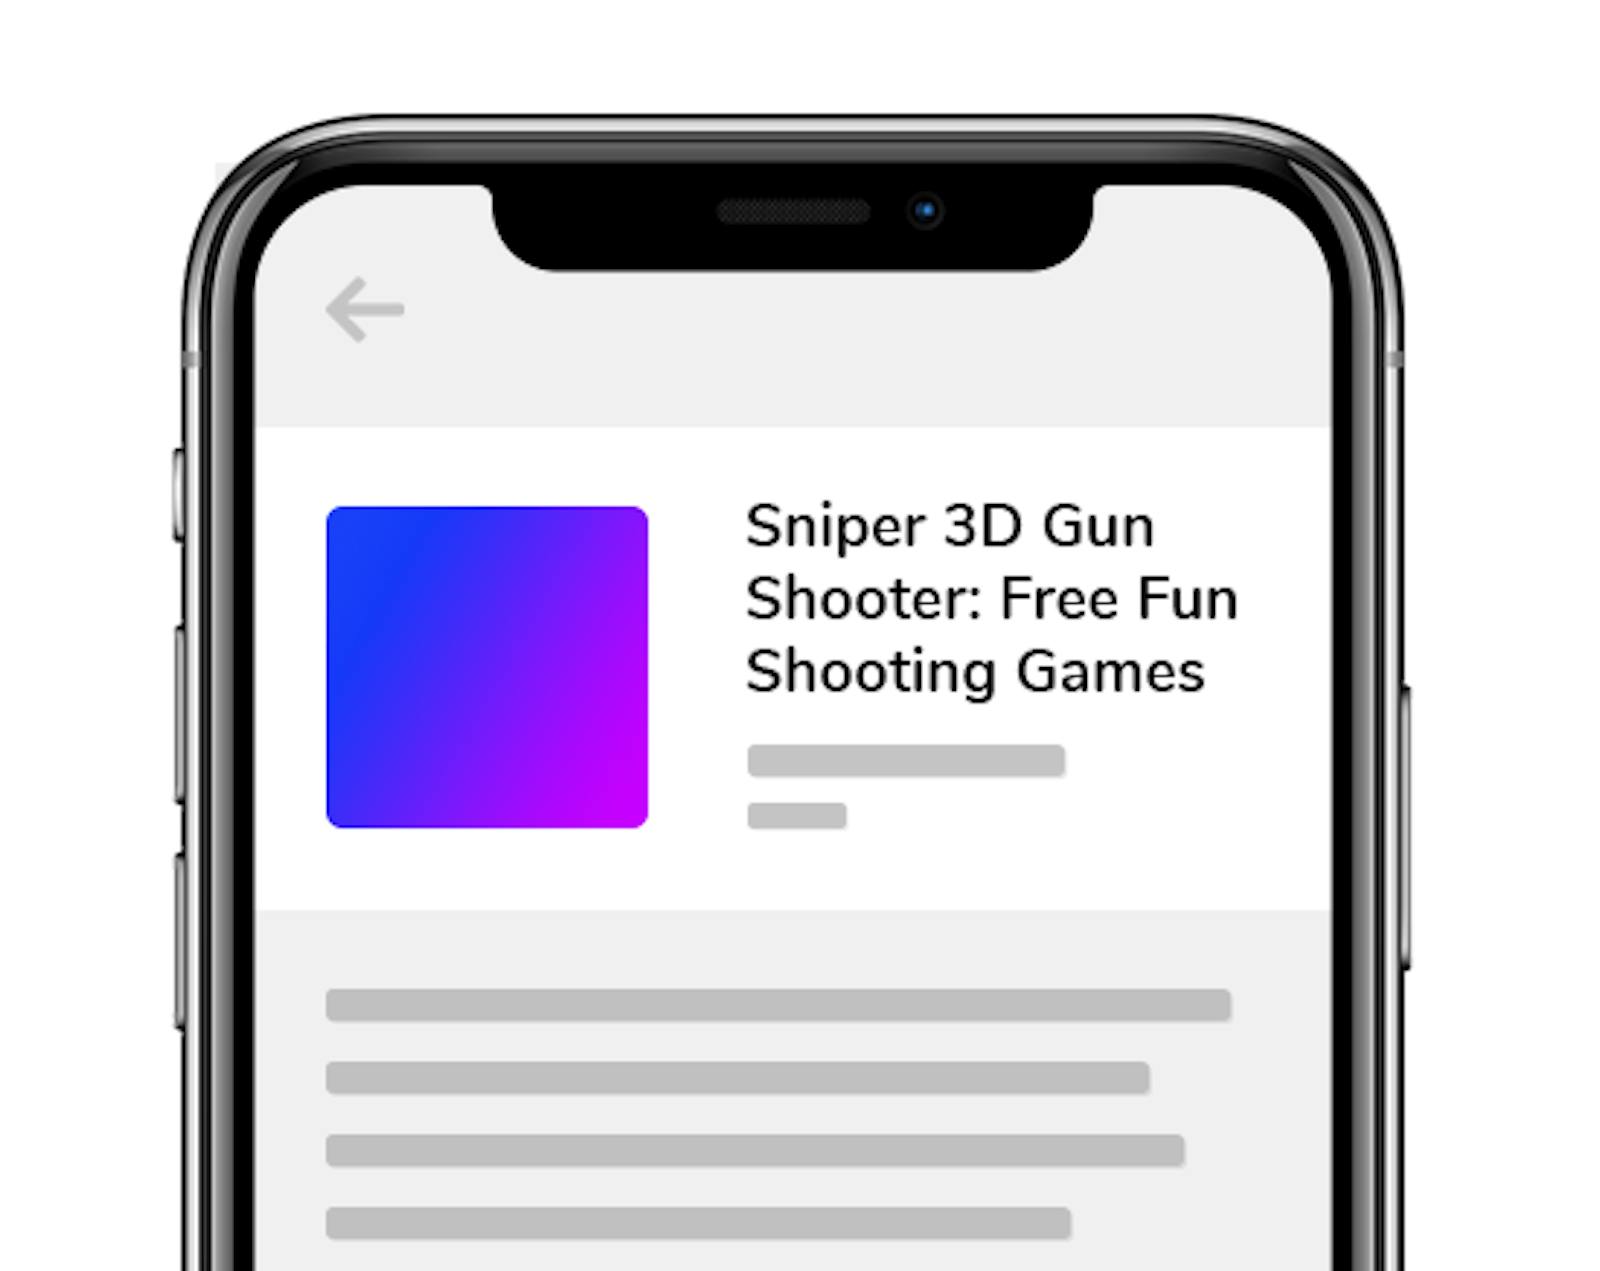 Example of a game with keywords included into the App Name: Sniper 3D Gun Shooter: Free Fun Shooting Games